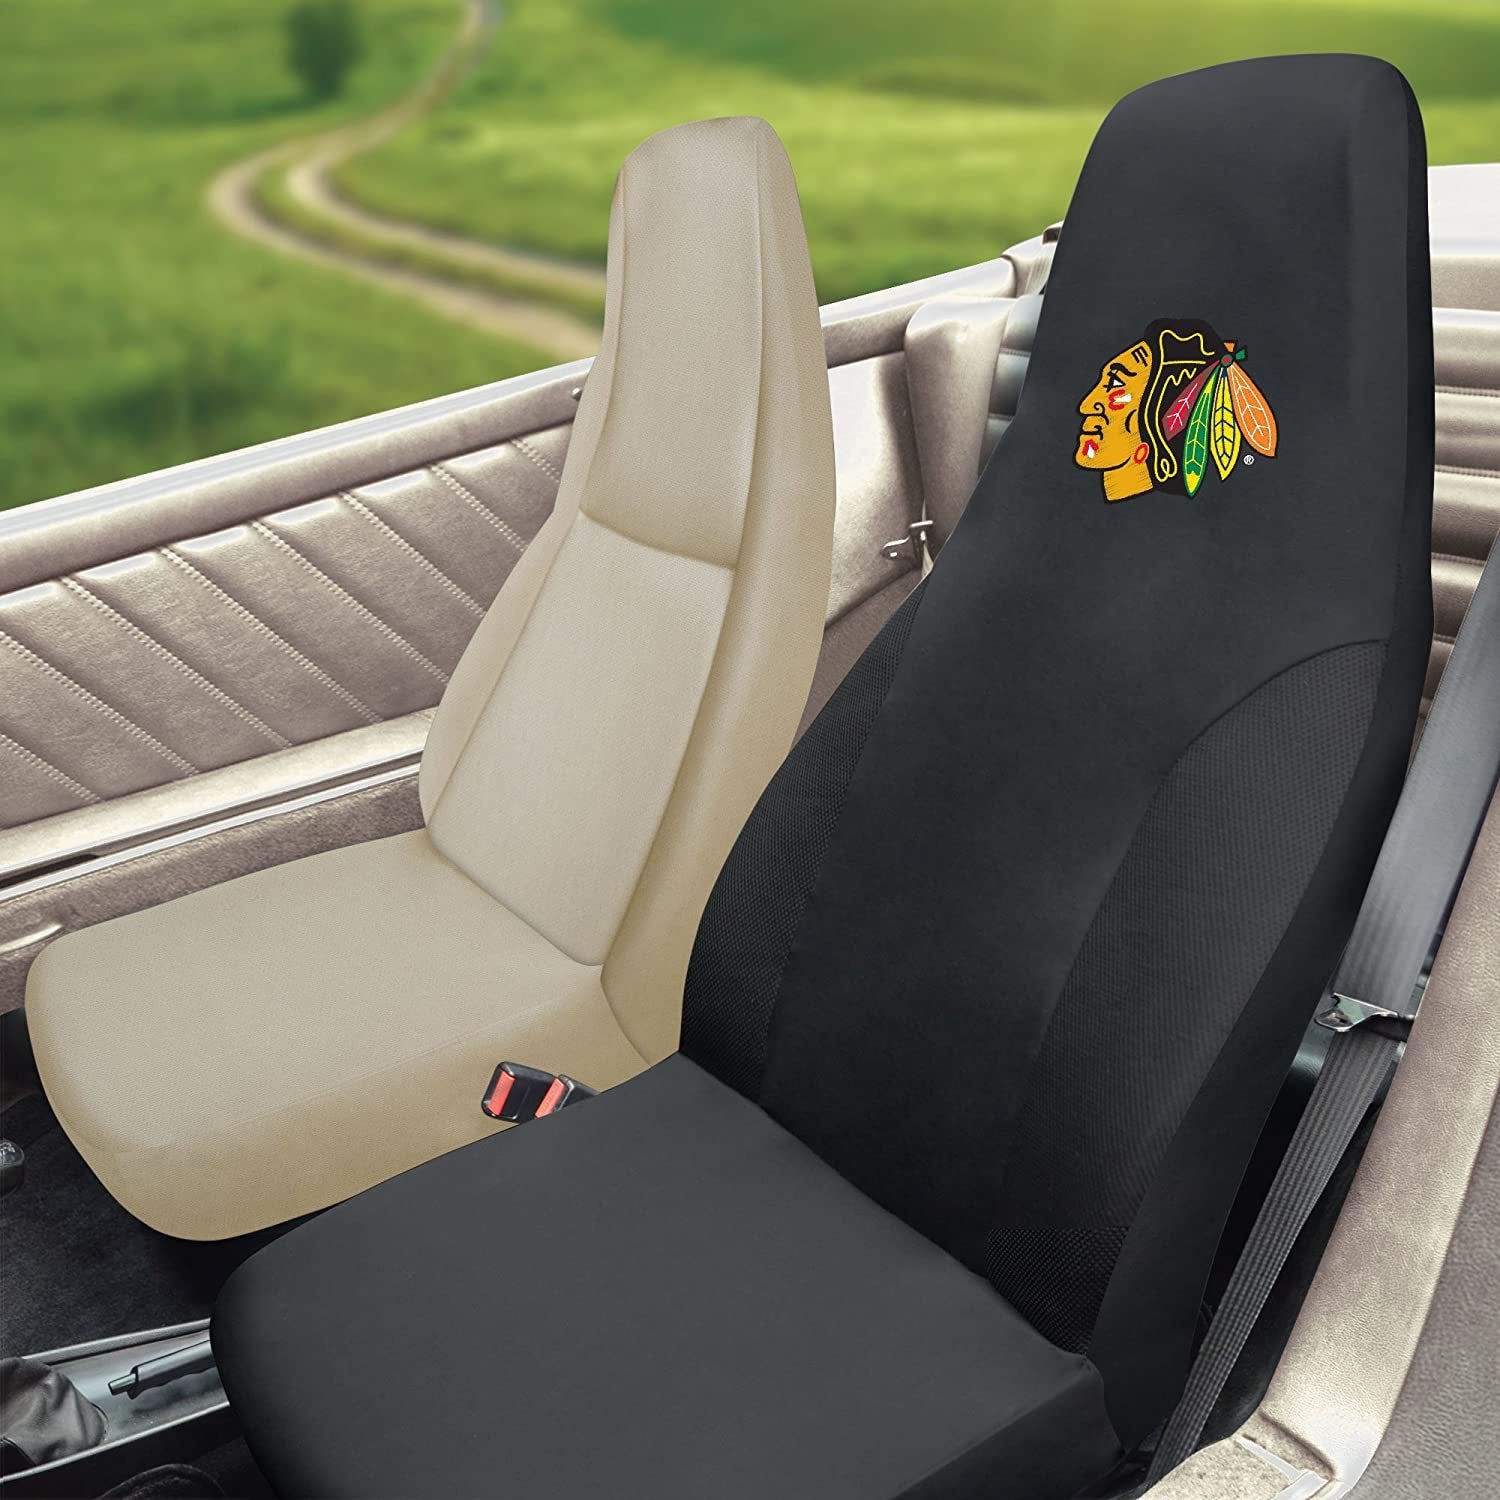 FANMATS - 14961 NHL Chicago Blackhawks Polyester Seat Cover,20"x48"